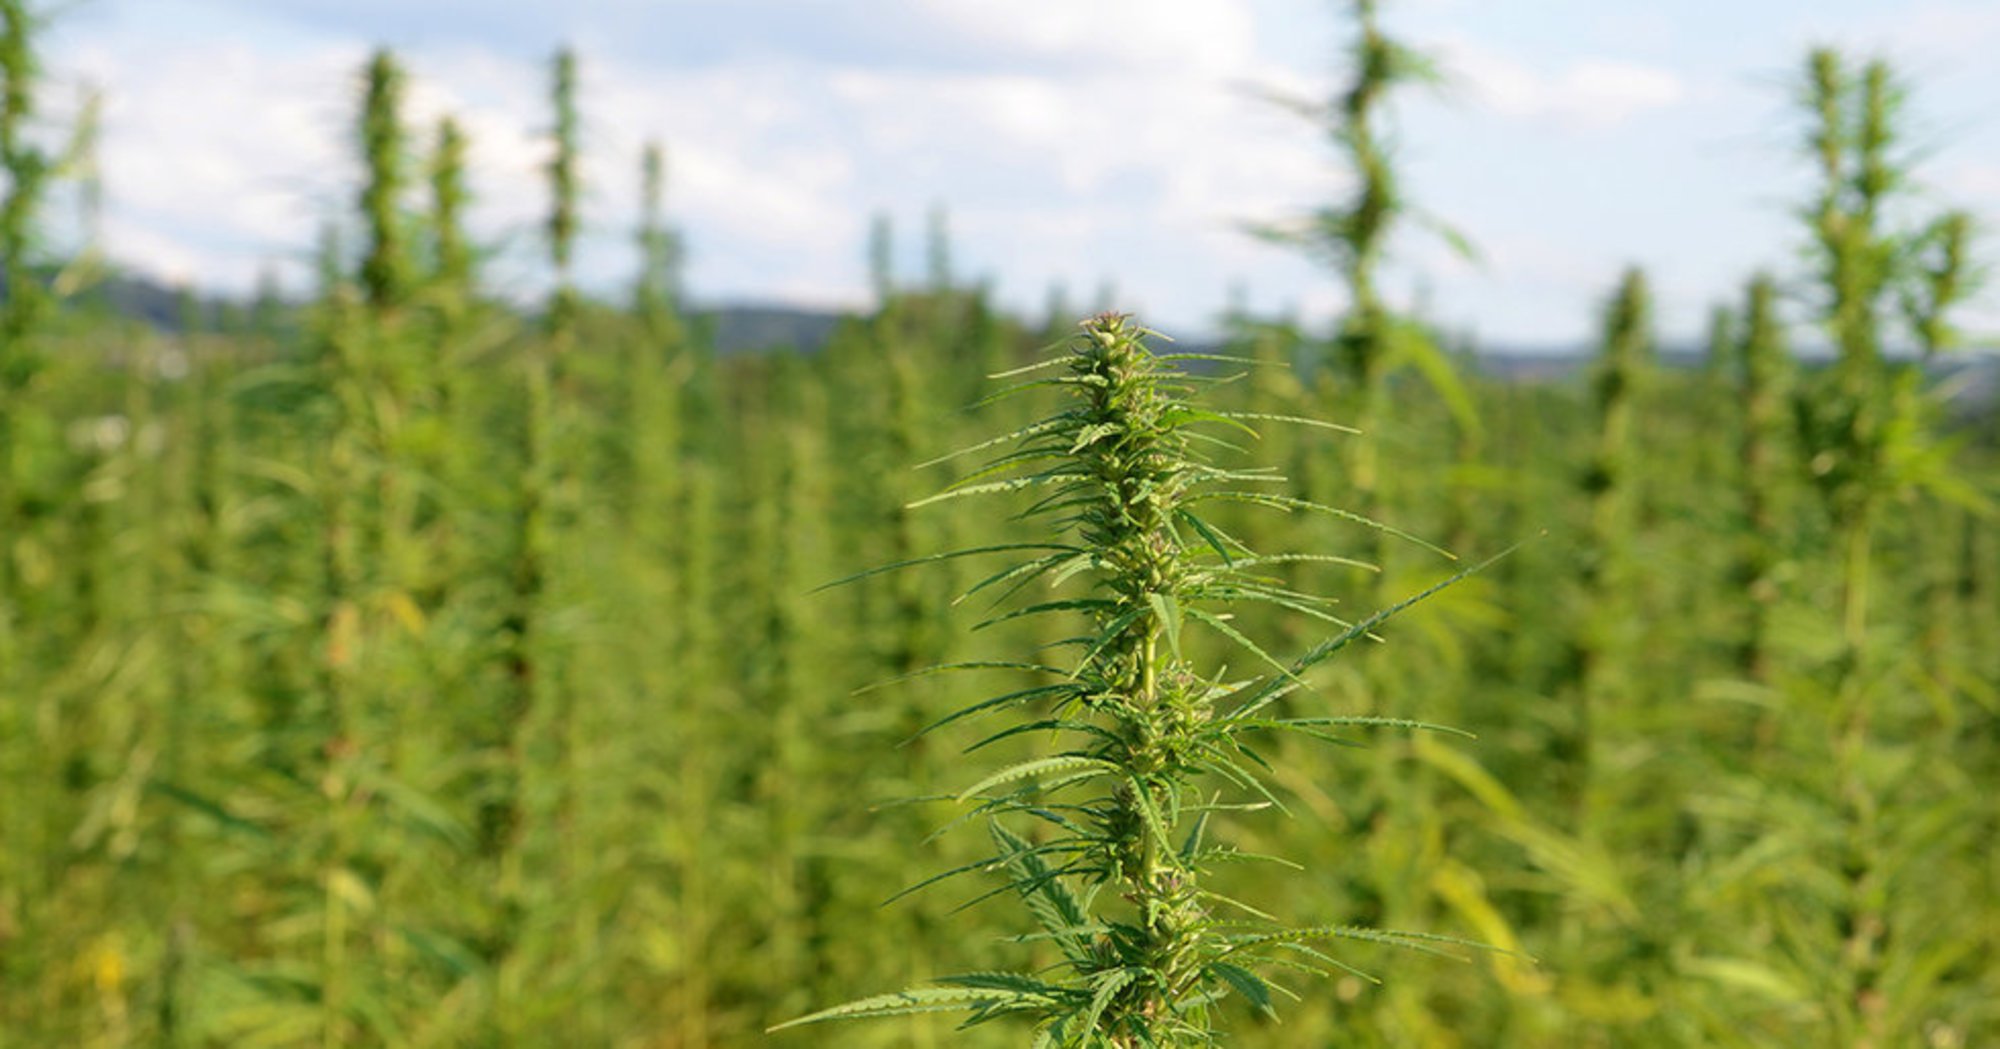 Can Hemp Become a 60 Million Acre Crop and Billion Dollar Industry?